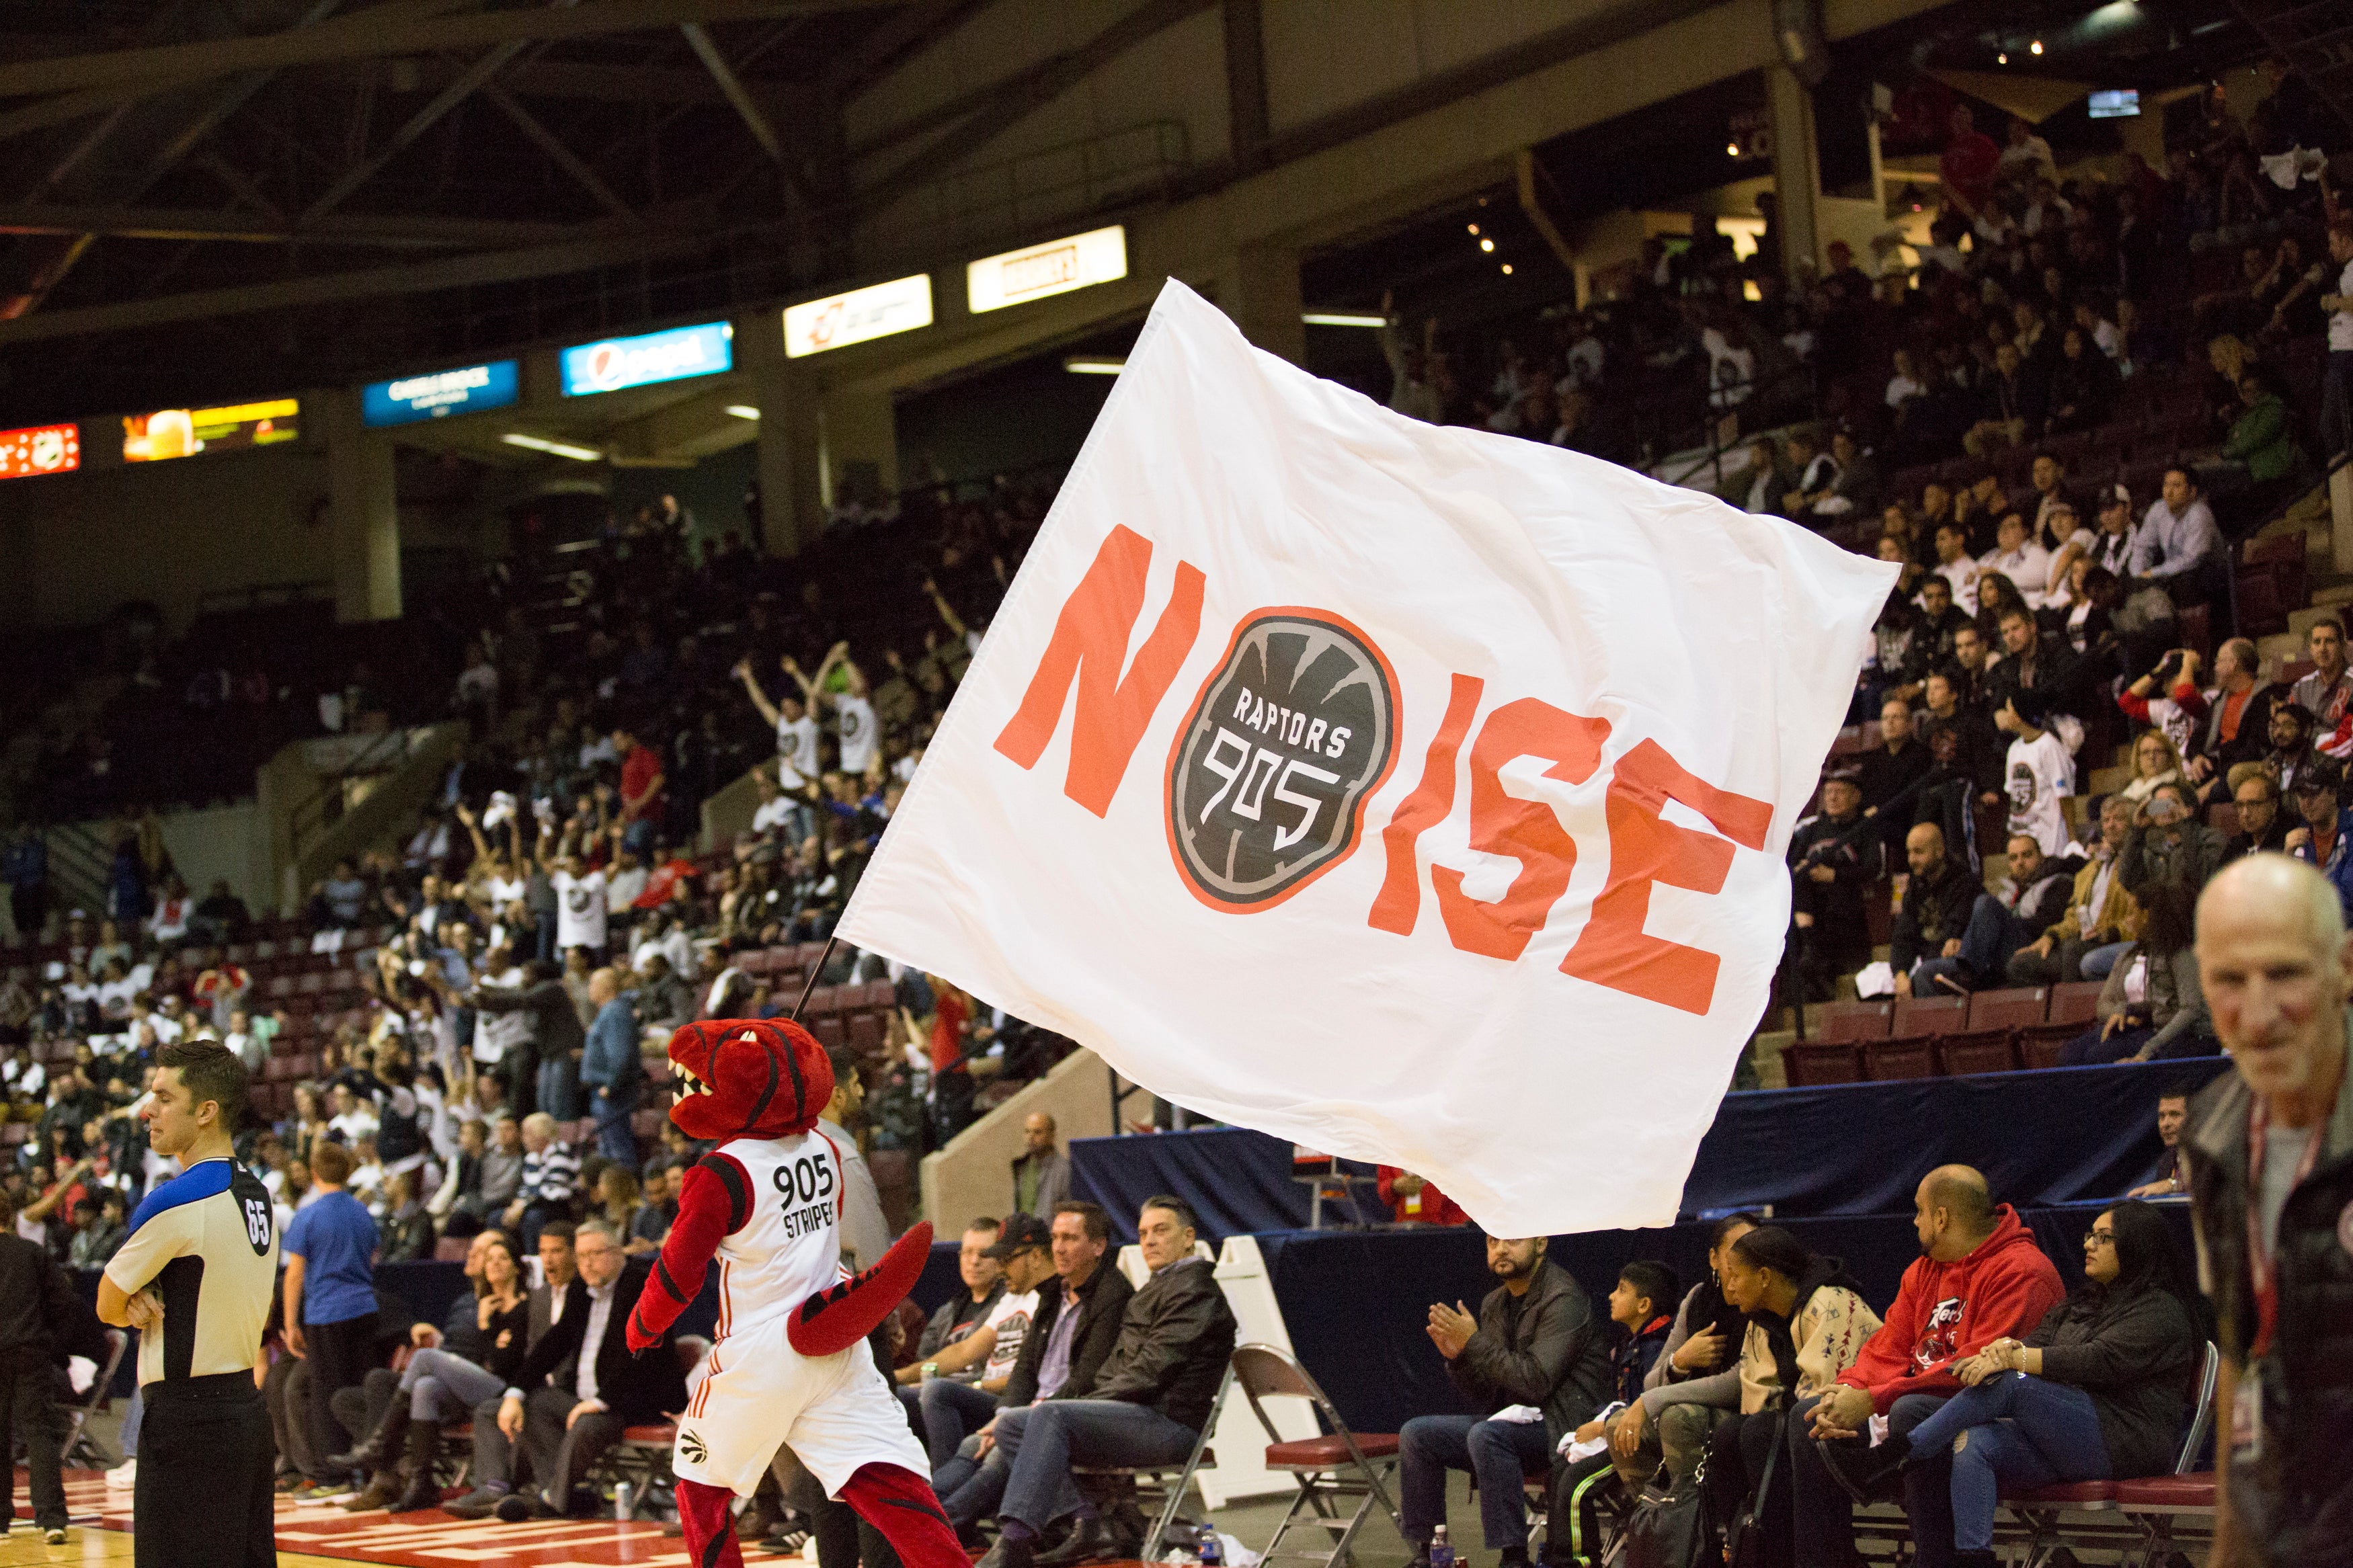 Raptors 905 vs Motor City Cruise in Mississauga promo photo for Exclusive presale offer code